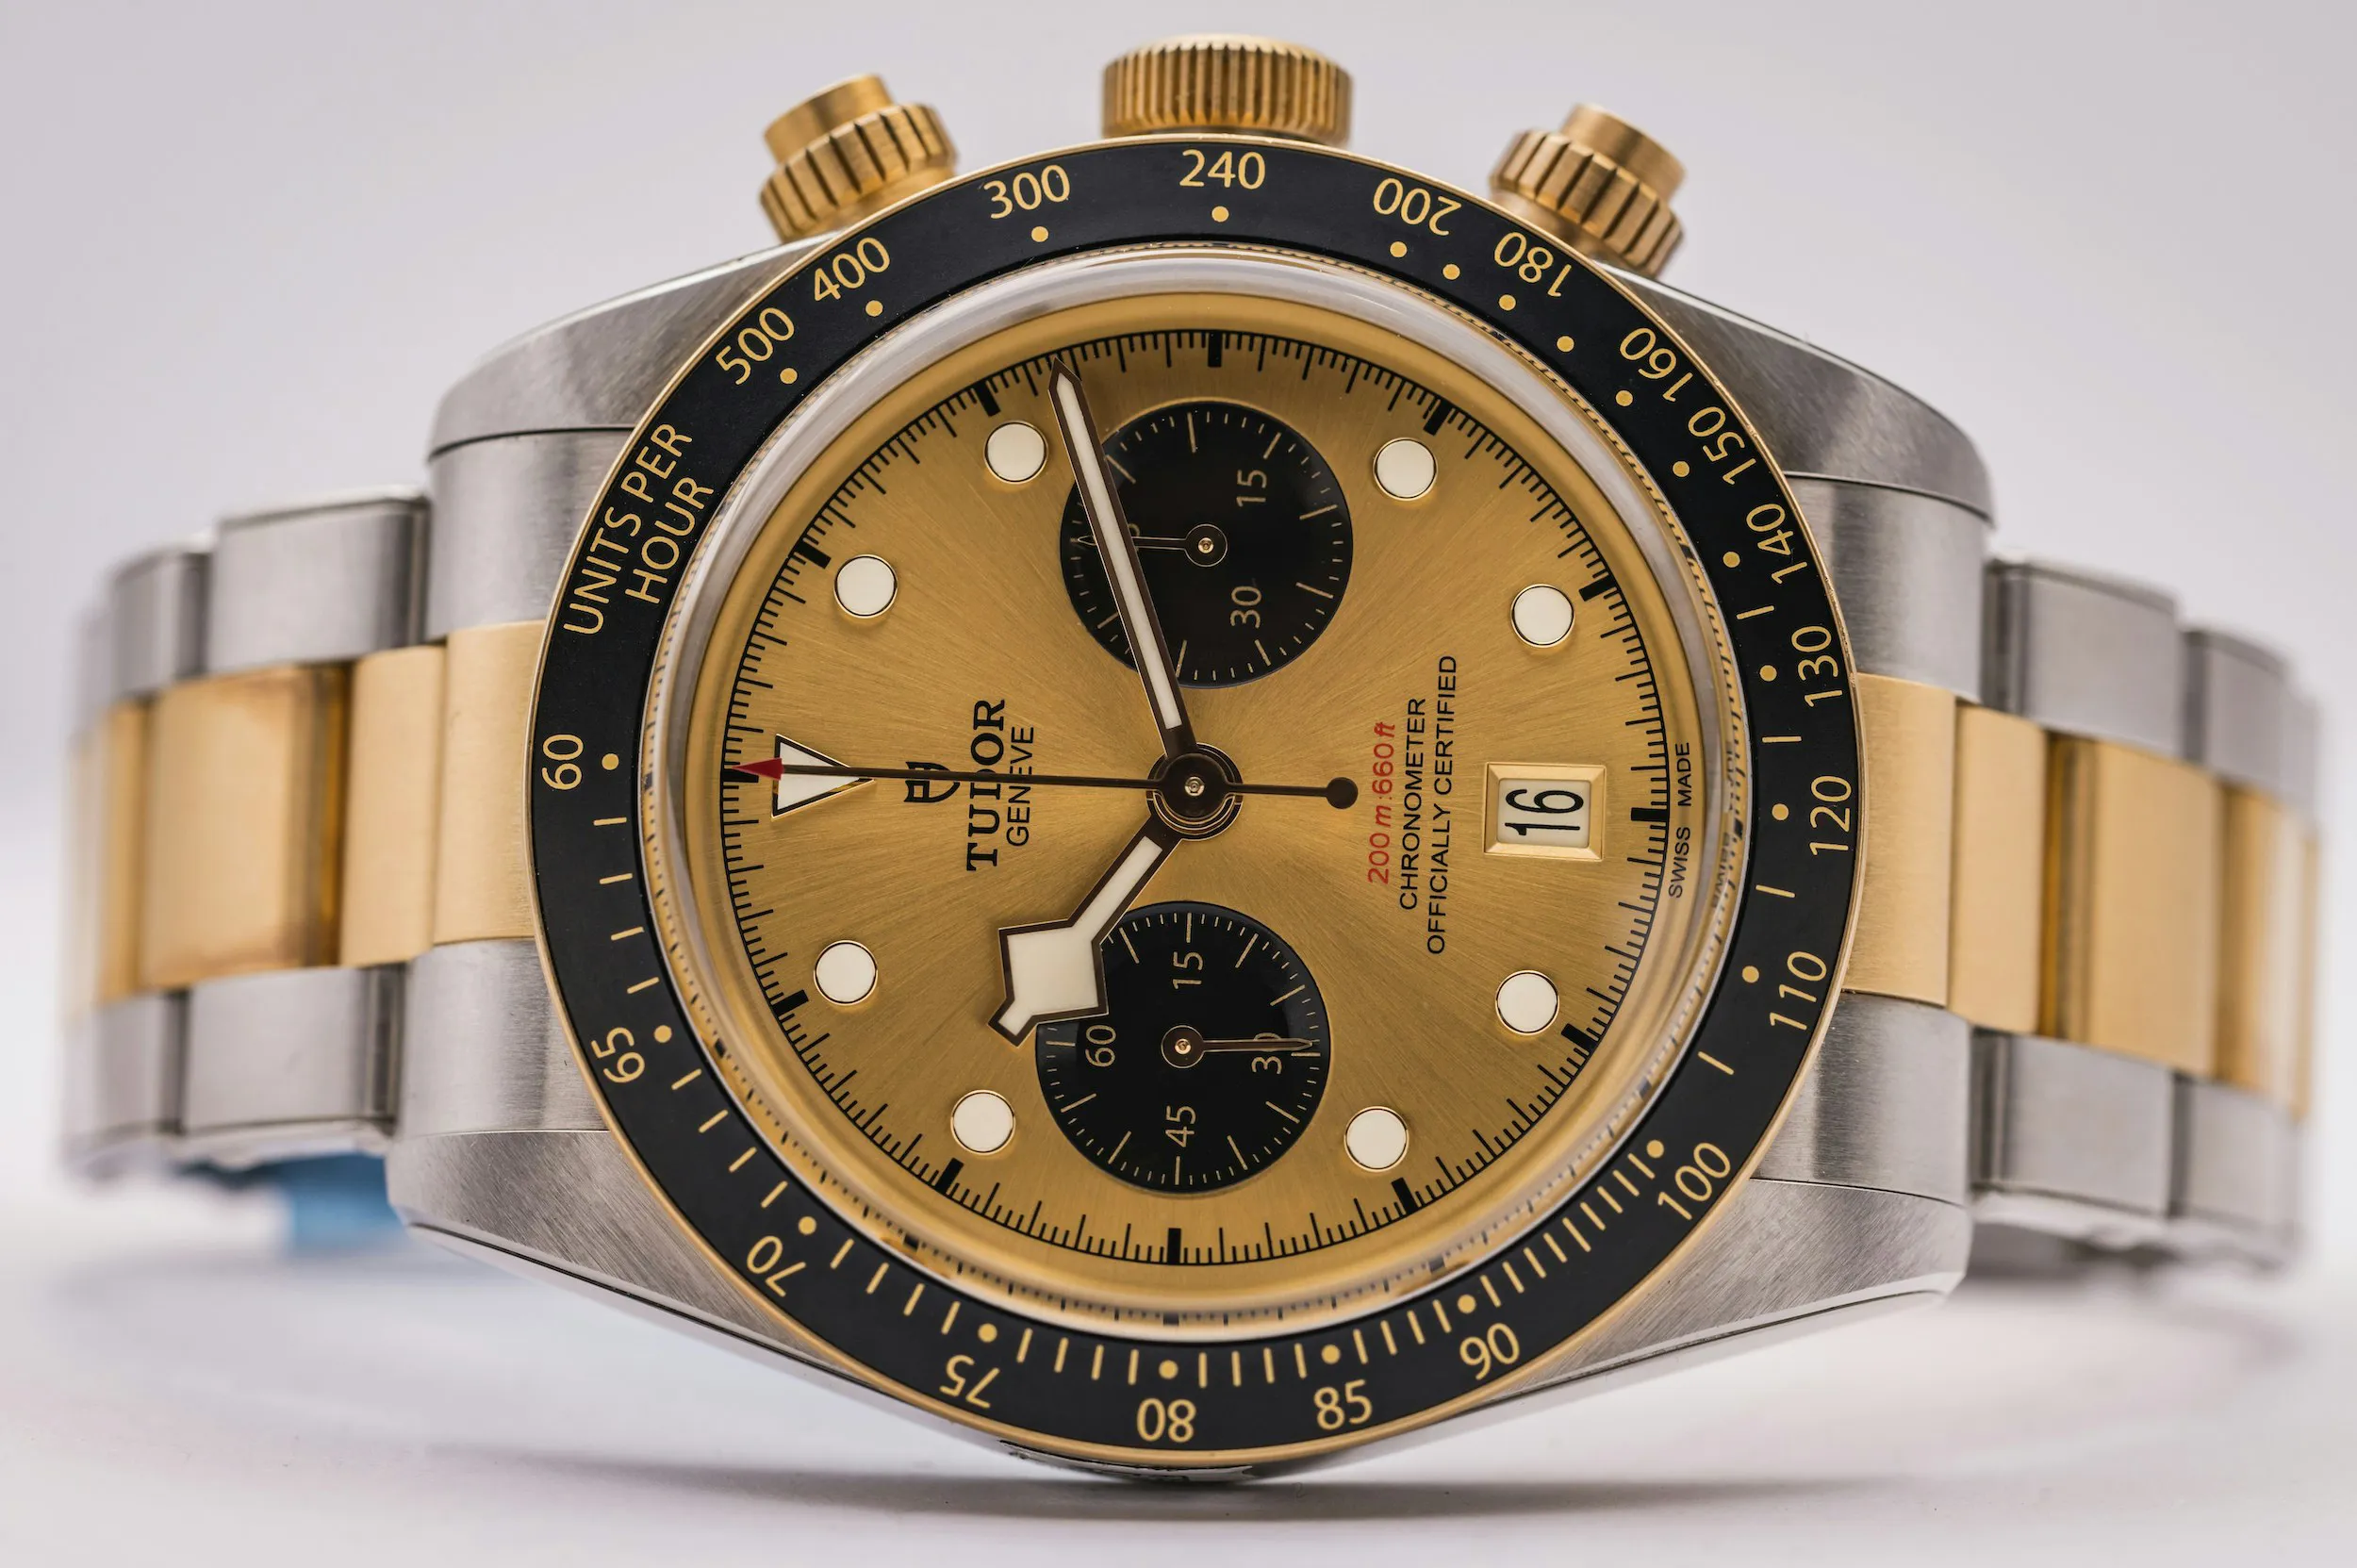 Tudor Black Bay Chrono S&G  M7936N-0007 41mm Yellow gold and stainless steel Golden 7